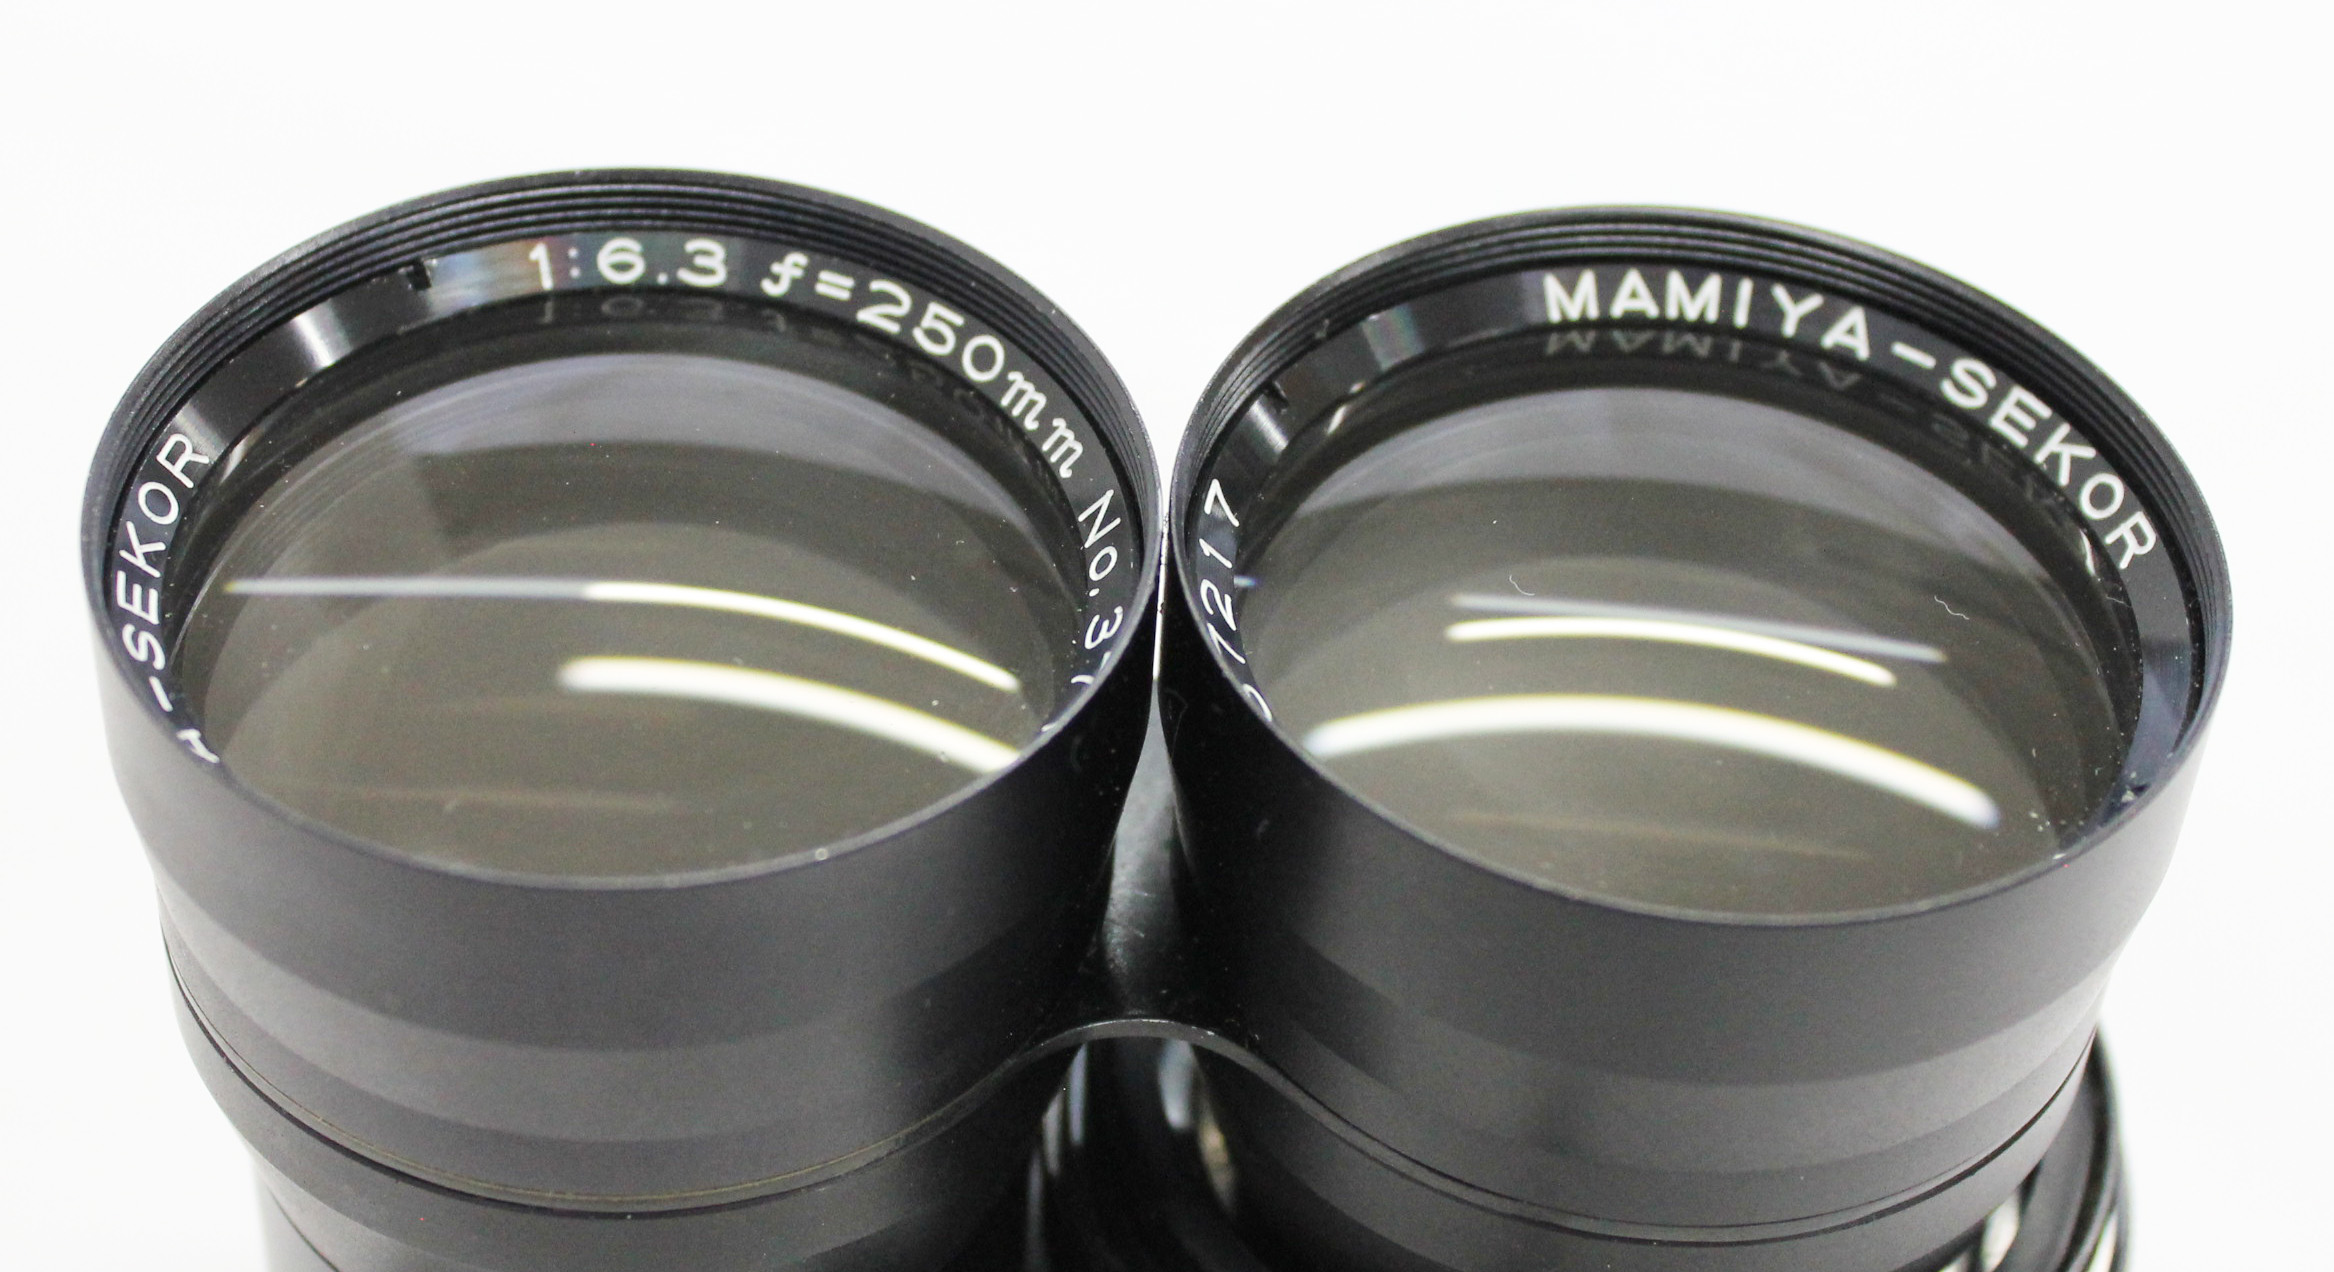  Mamiya Sekor 250mm F/6.3 TLR Lens for C3 C33 C220 C330 from Japan Photo 7